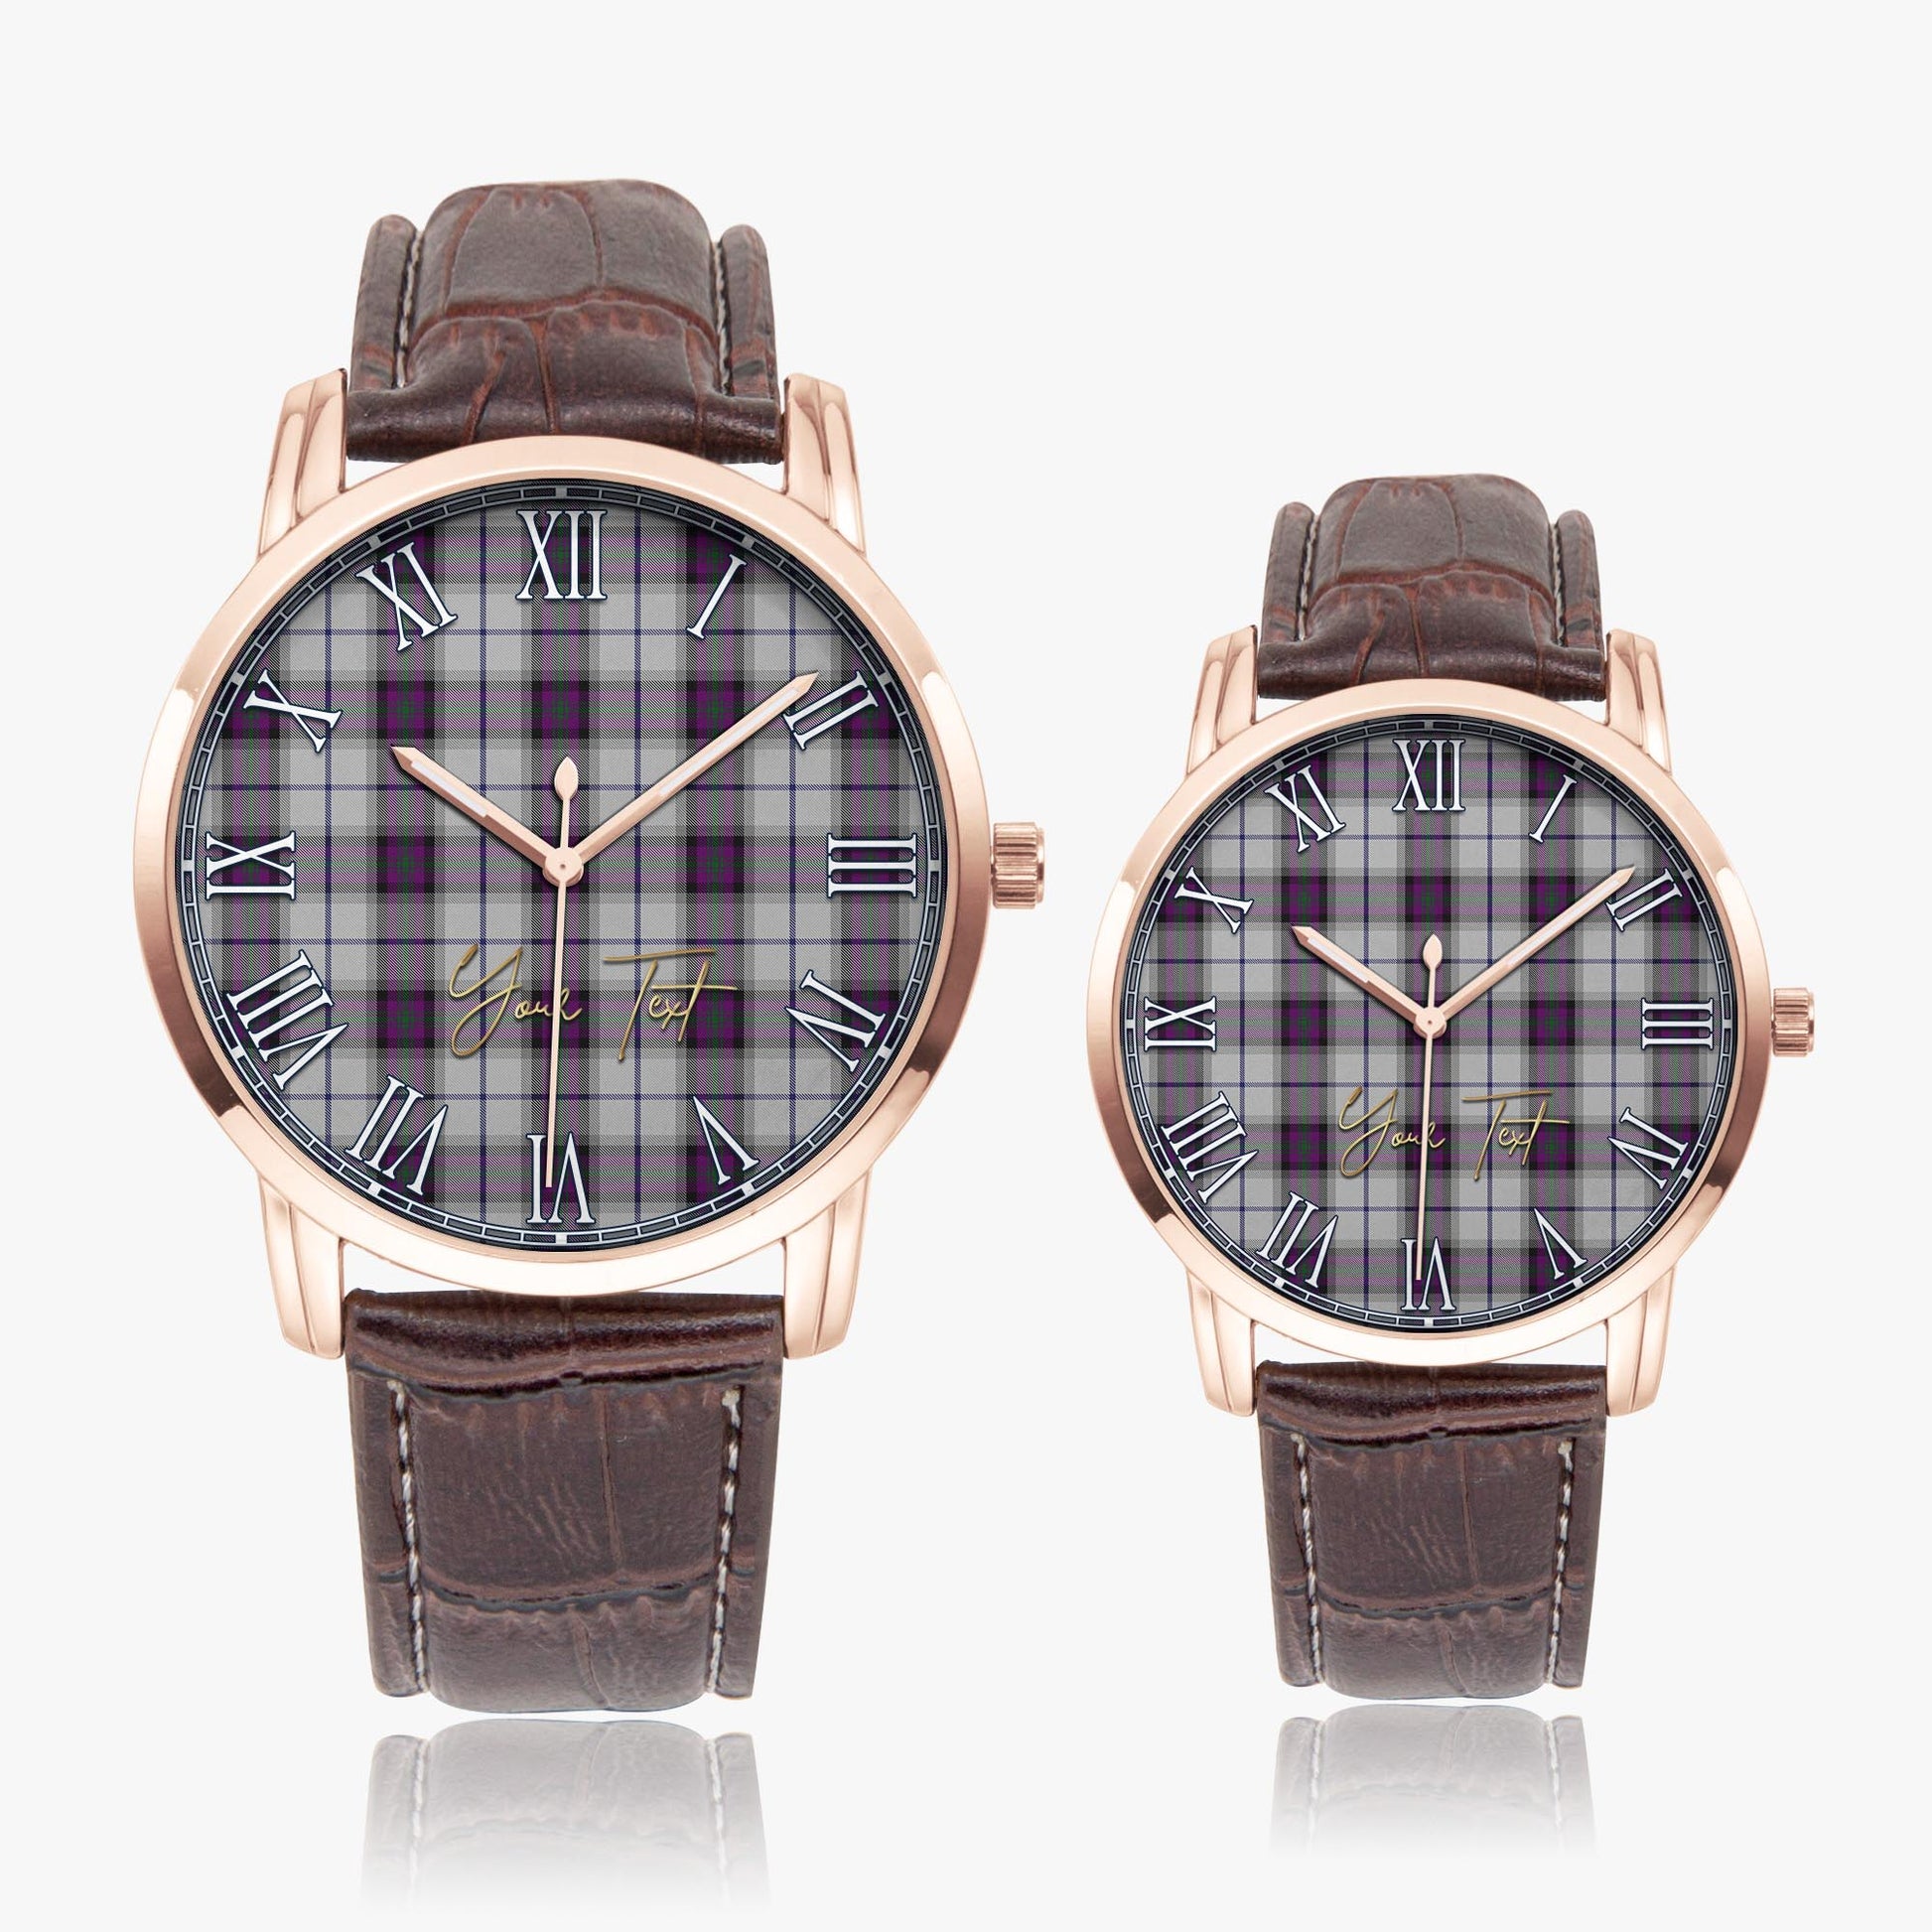 Alexander of Menstry Dress Tartan Personalized Your Text Leather Trap Quartz Watch Wide Type Rose Gold Case With Brown Leather Strap - Tartanvibesclothing